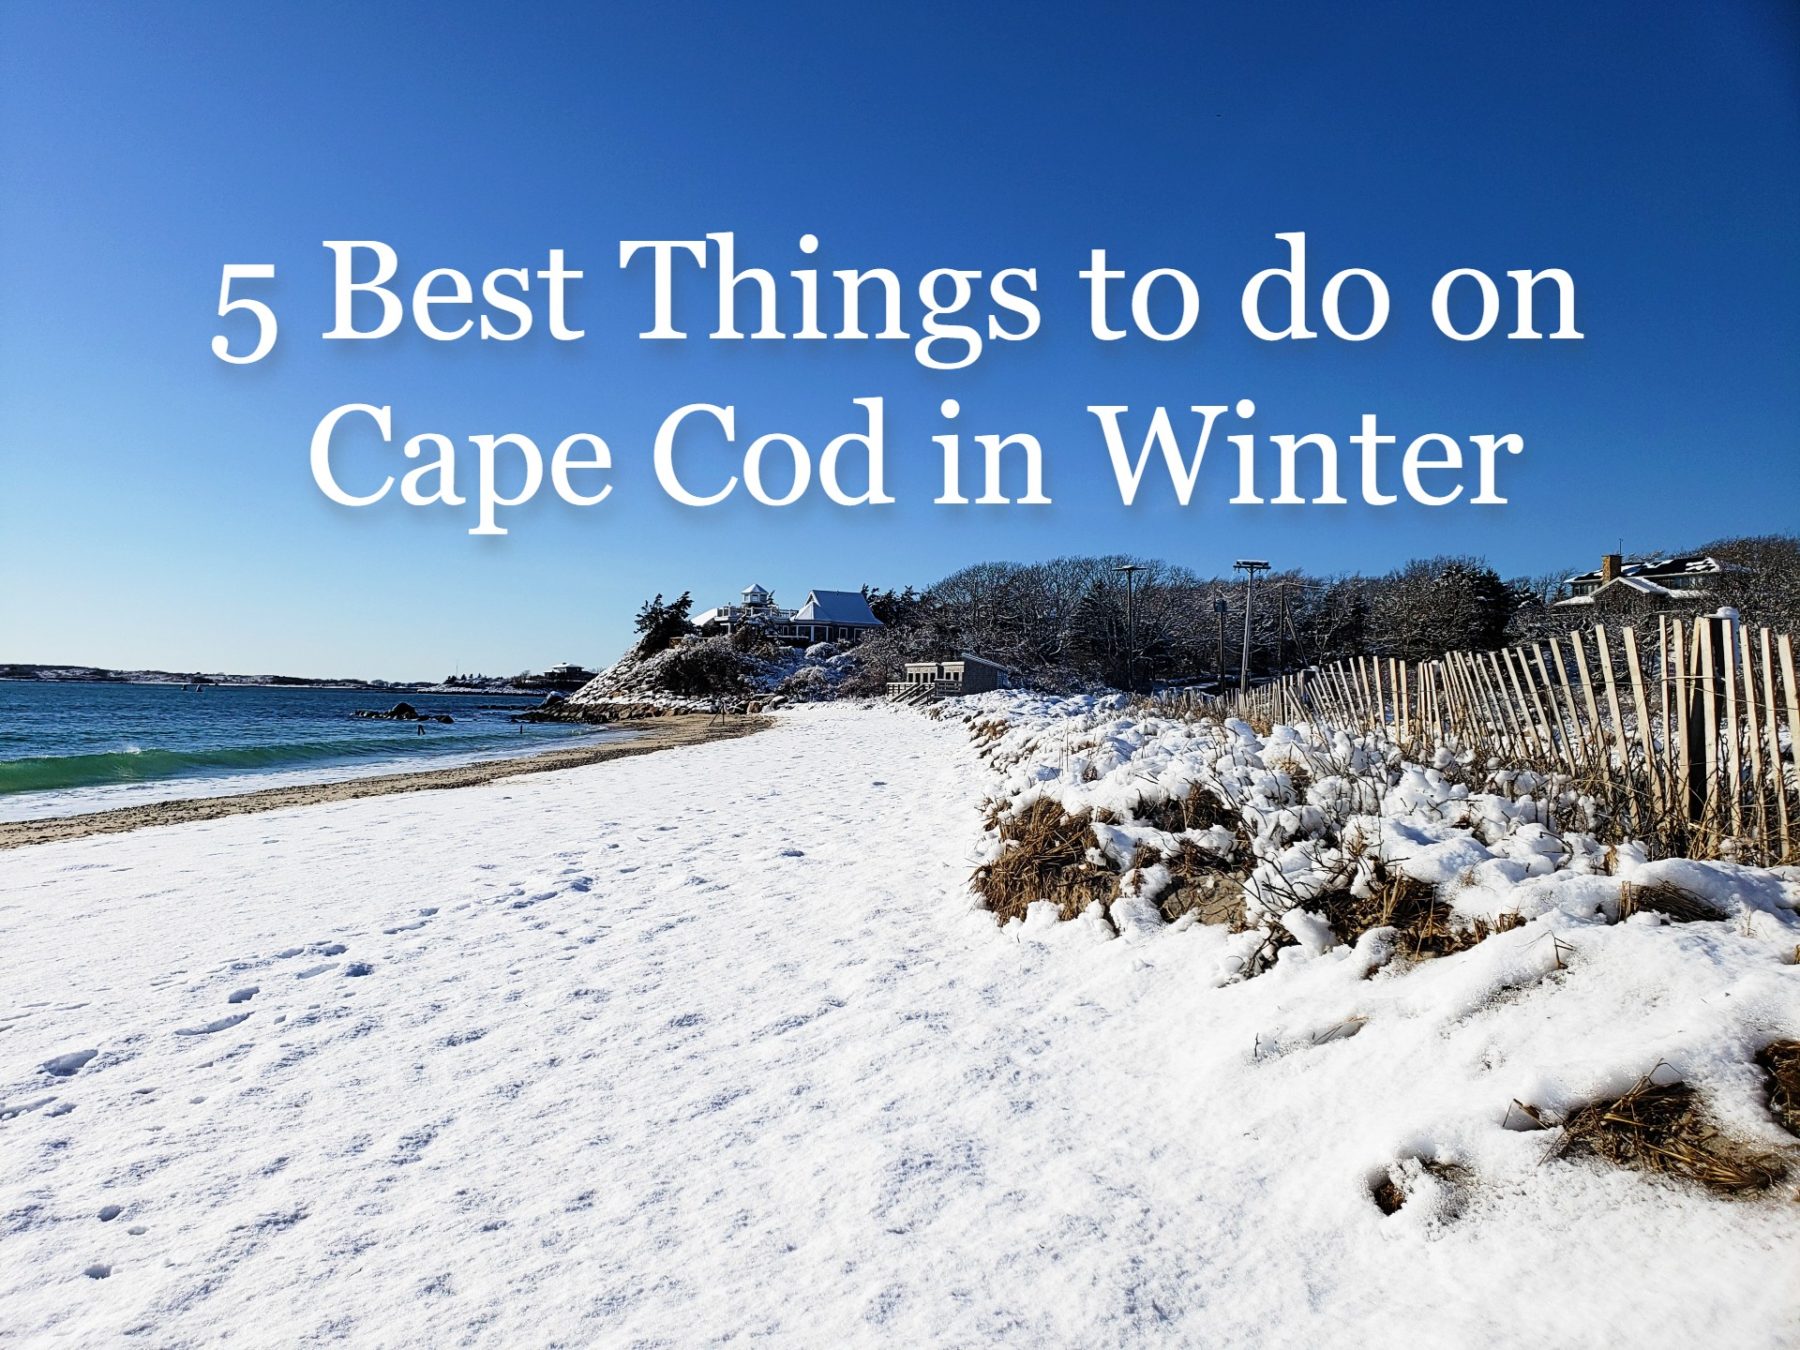 5 Best Things to do on Cape Cod in Winter